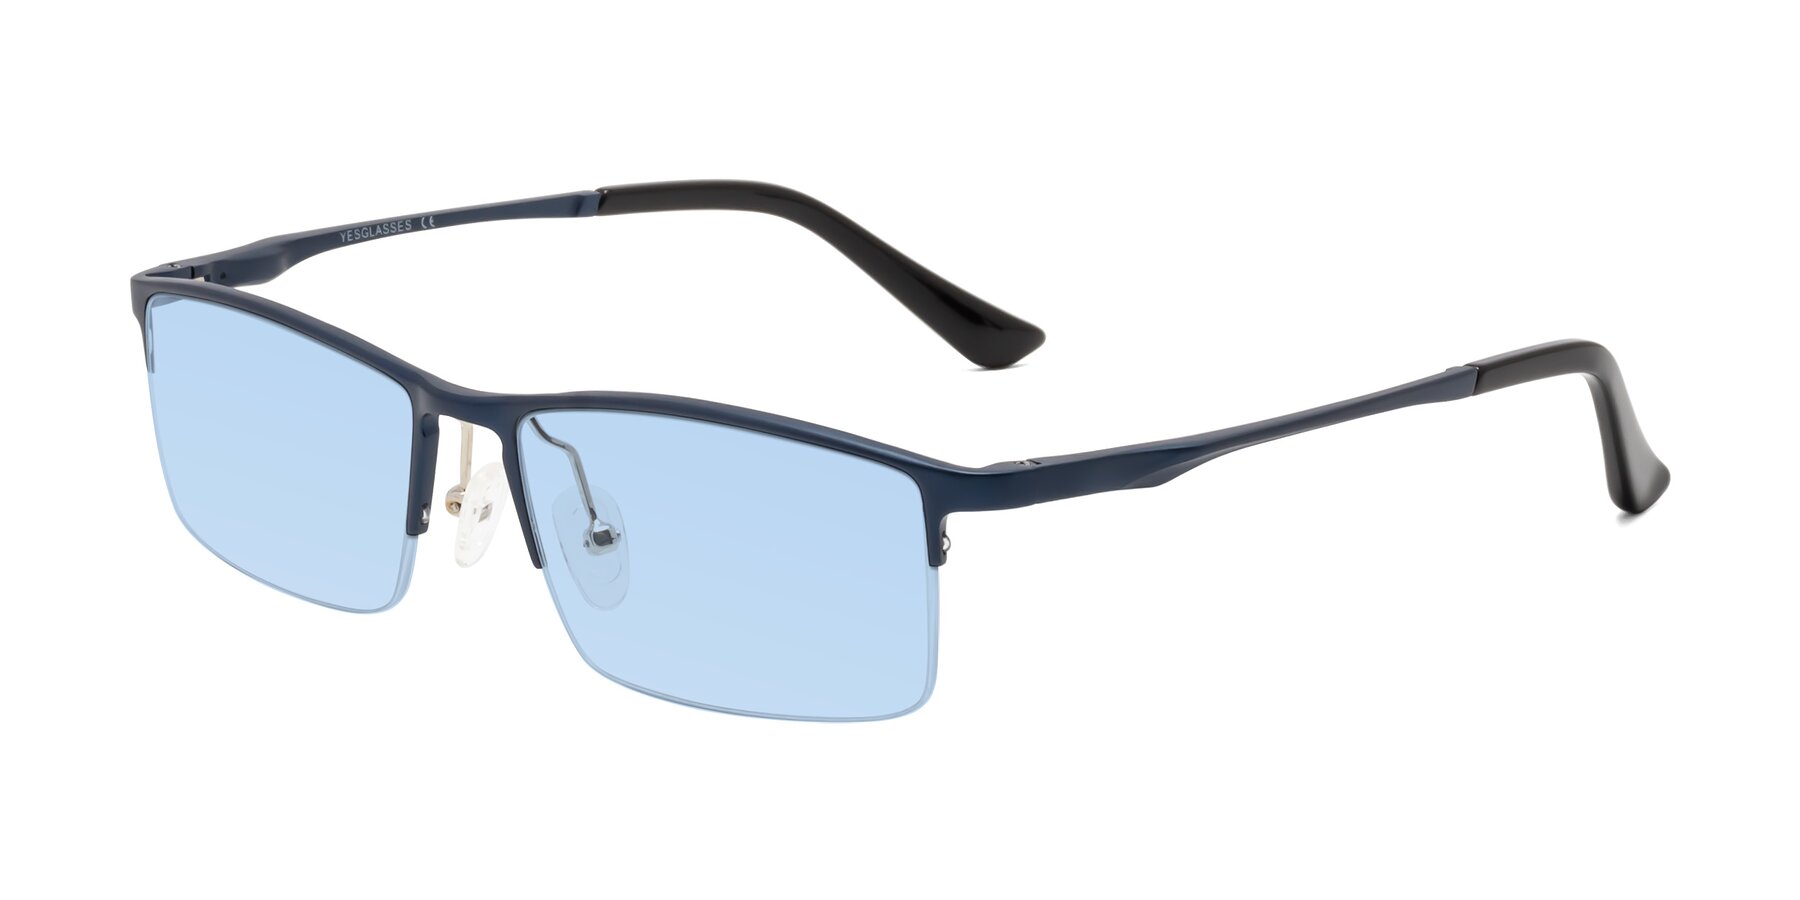 Angle of CX6263 in Blue with Light Blue Tinted Lenses